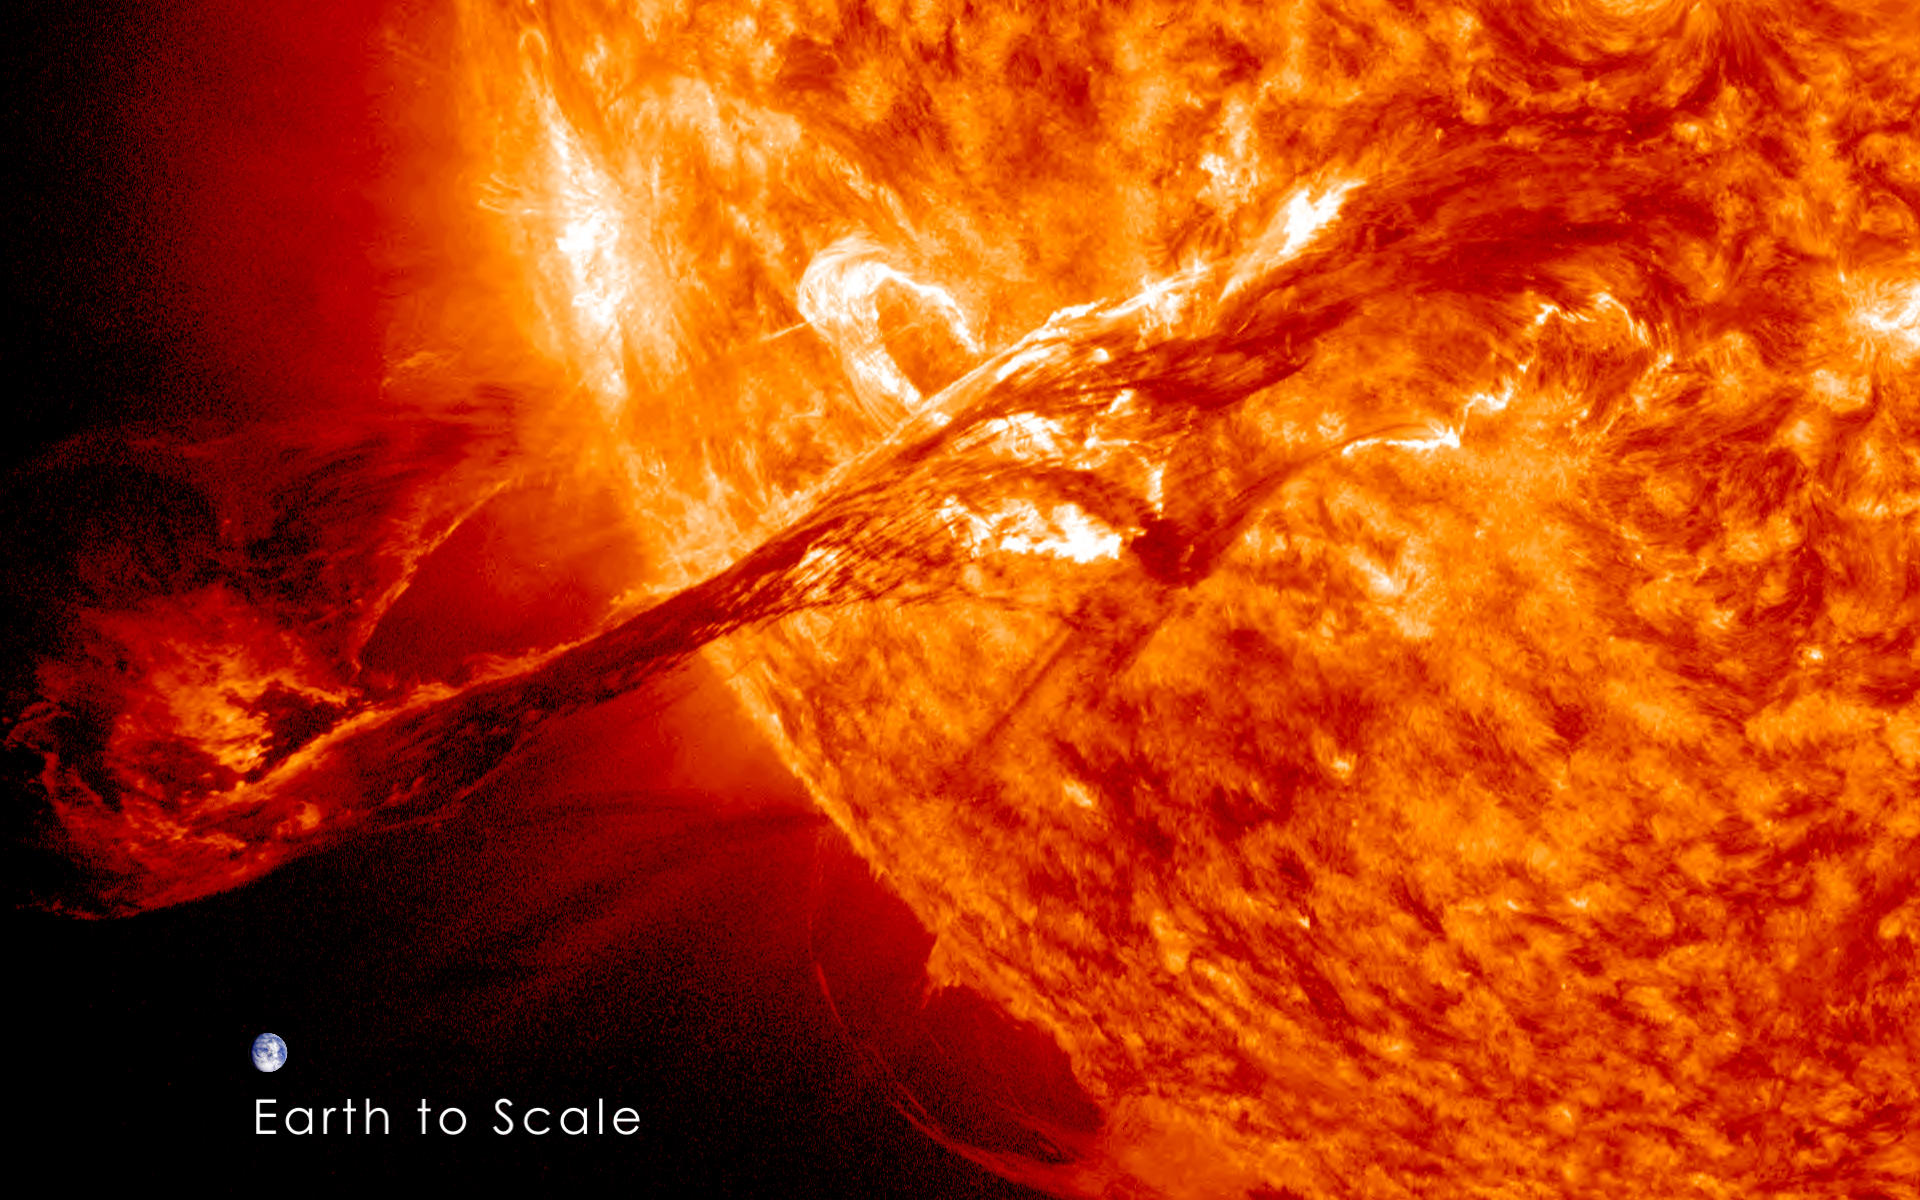 Image of the Earth to scale with the filament eruption.  Note: the Earth is not this close to the sun, this image is for scale purposes only.